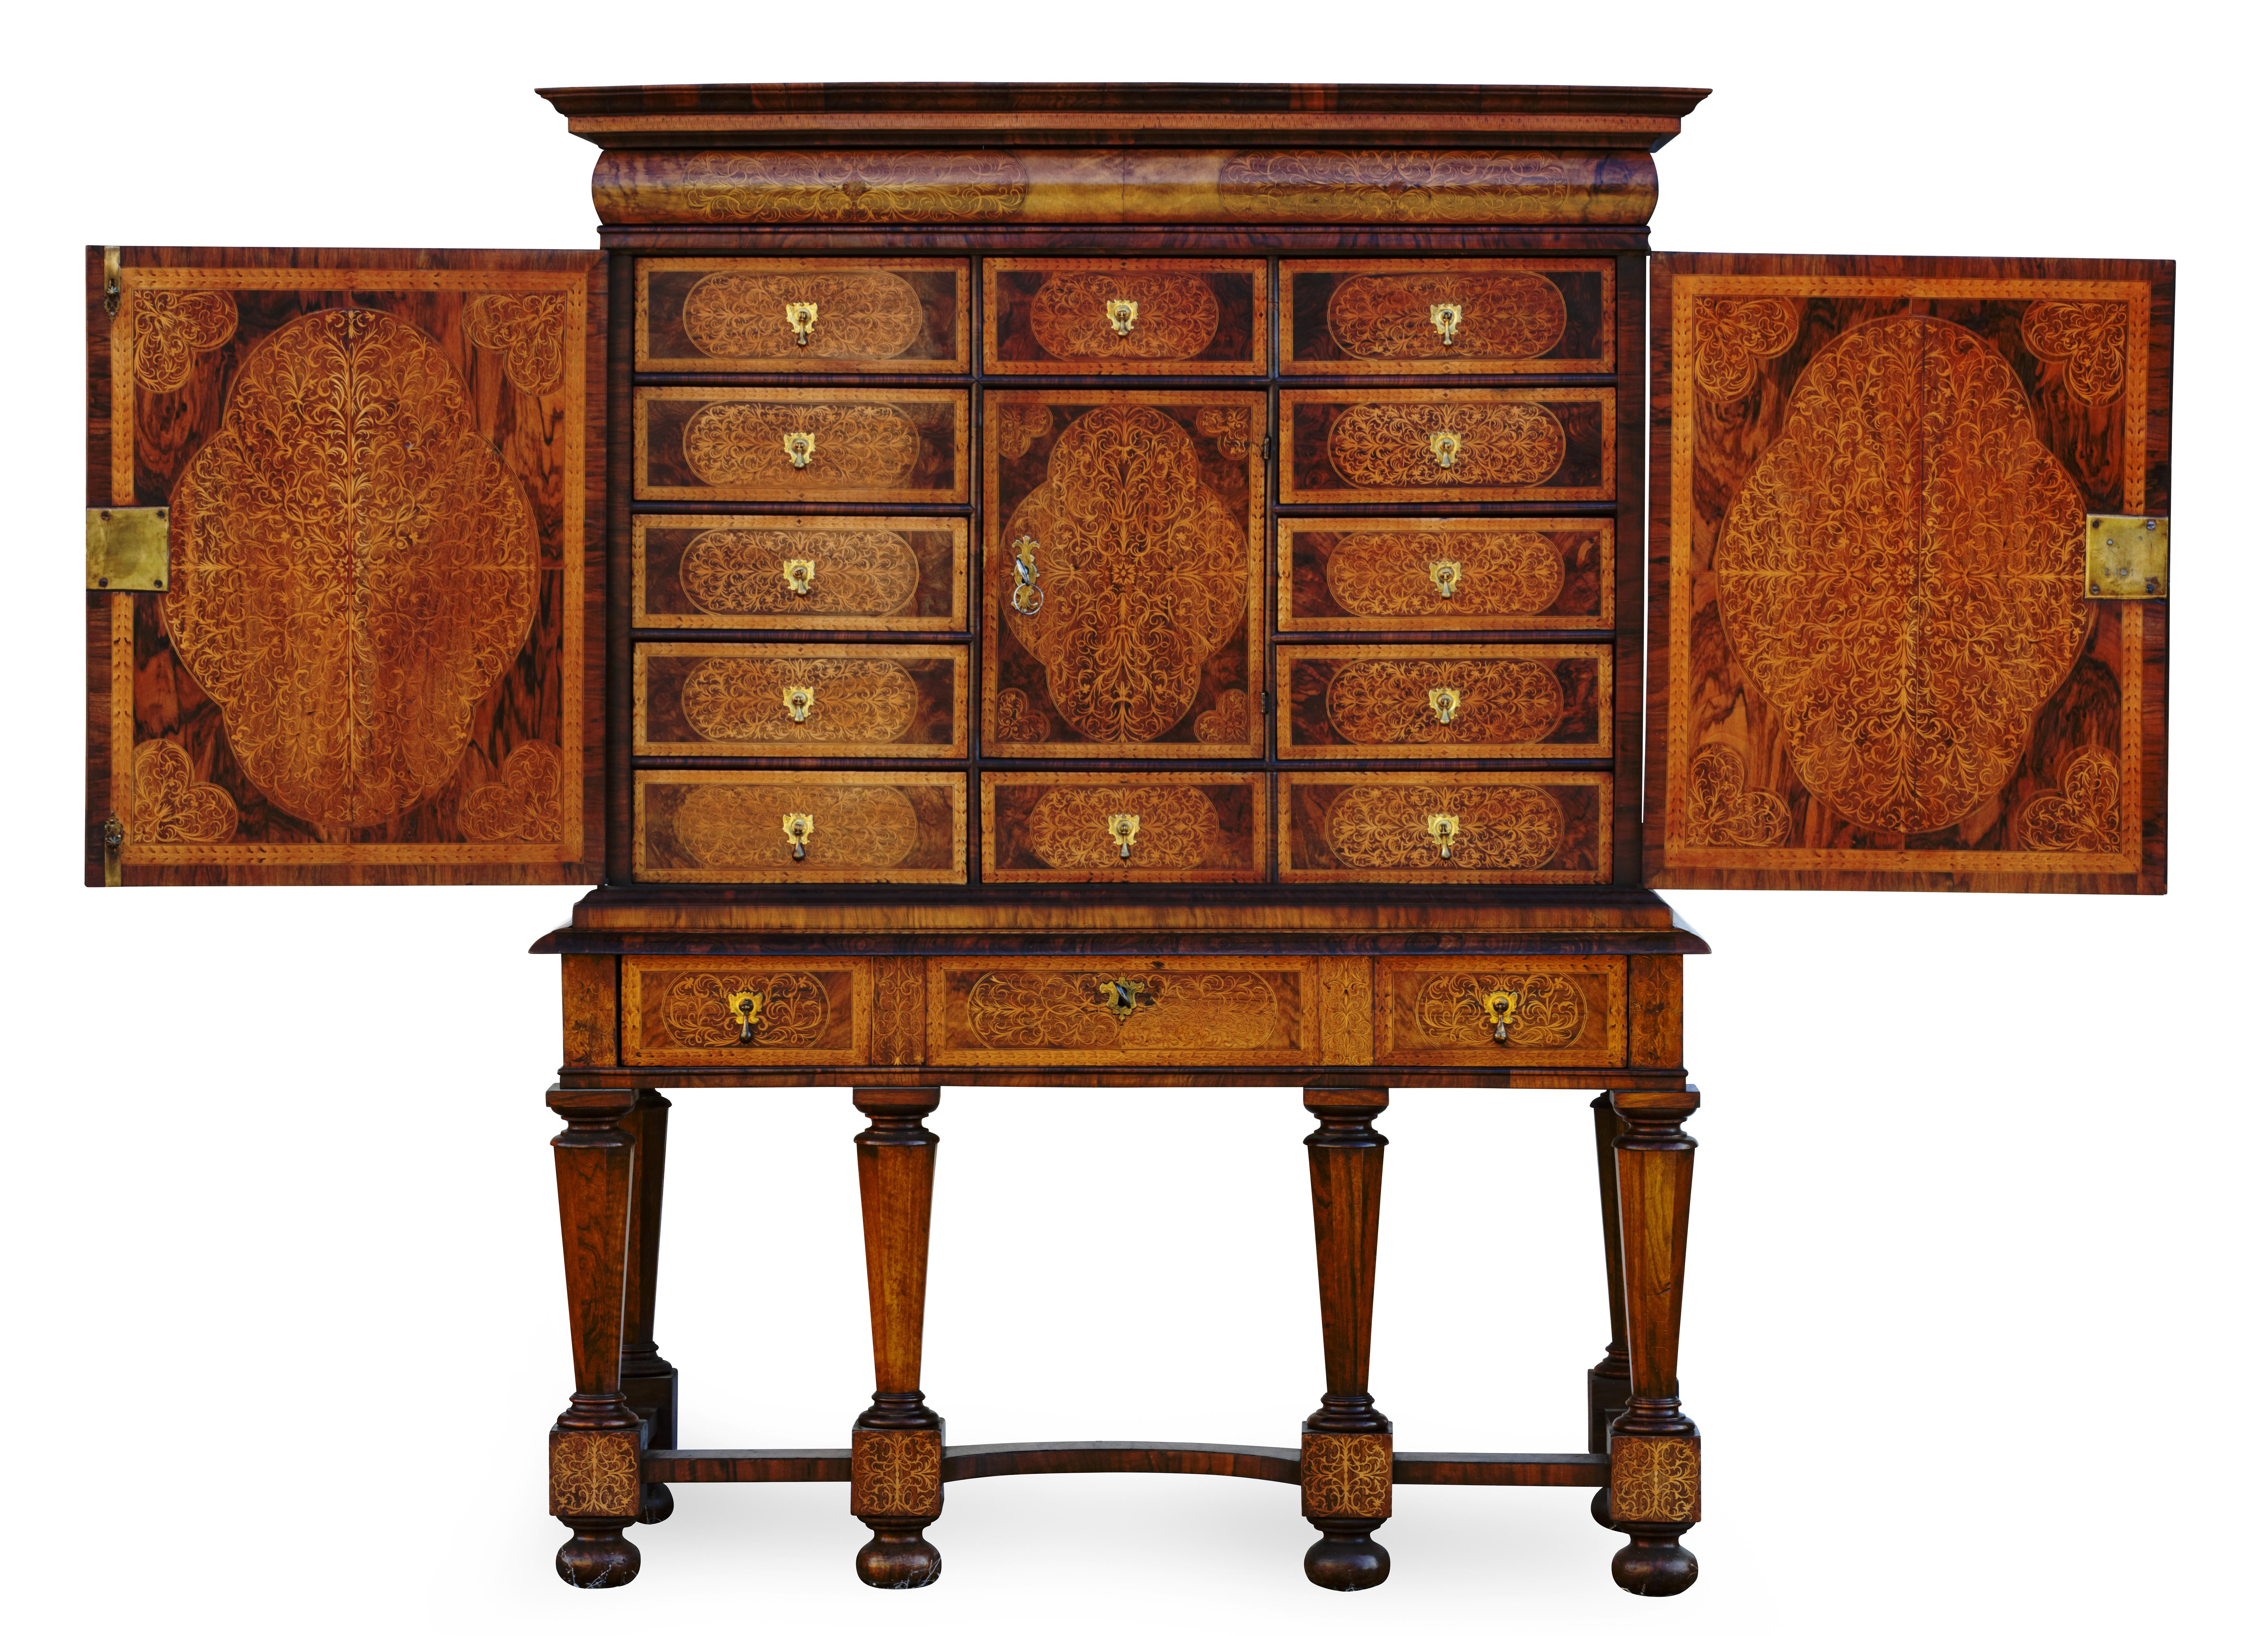 An Anglo-Dutch William and Mary Seaweed Marquetry cabinet on stand by Gerrit Jensen, Royal Cabinetmaker
England, circa 1690

The cabinet is completely covered with so called Seaweed marquetry and it is of the finest, most splendid quality! The